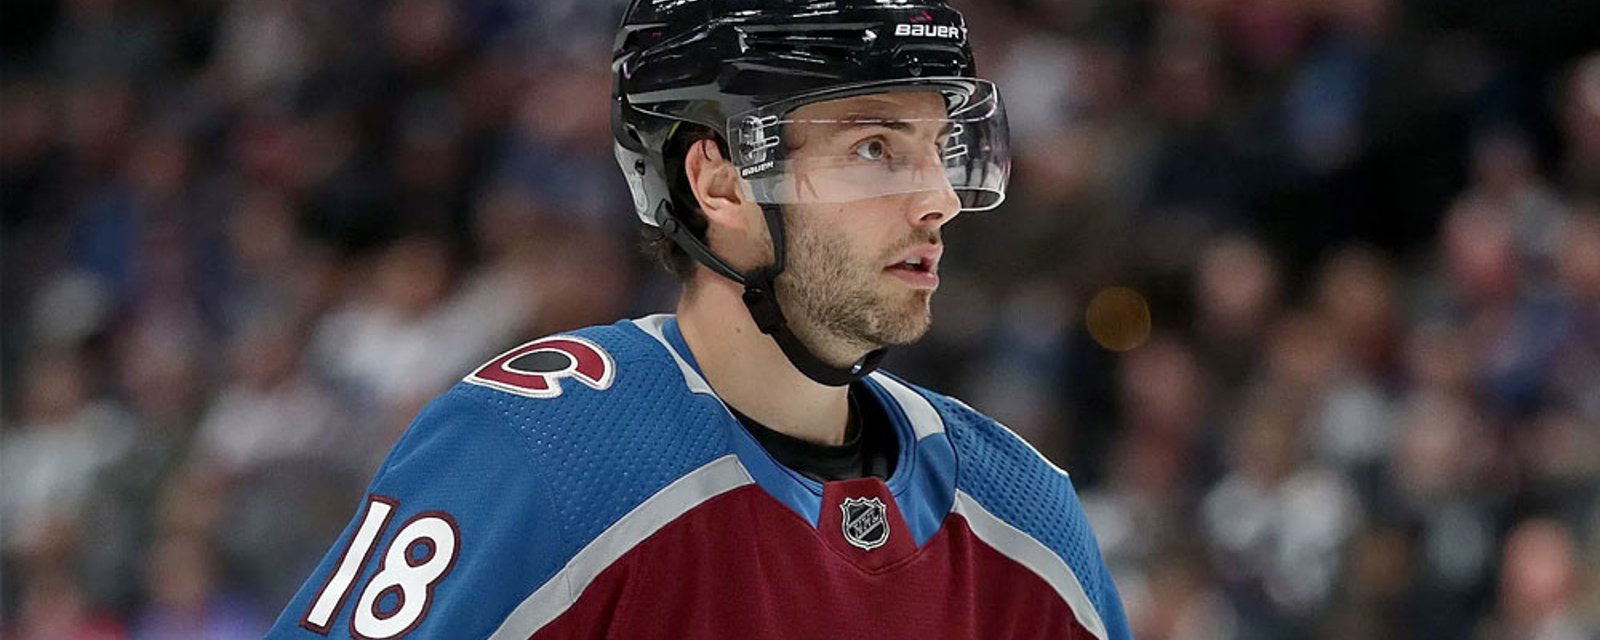 Breaking: Brassard reportedly signs one year deal with Canadian team